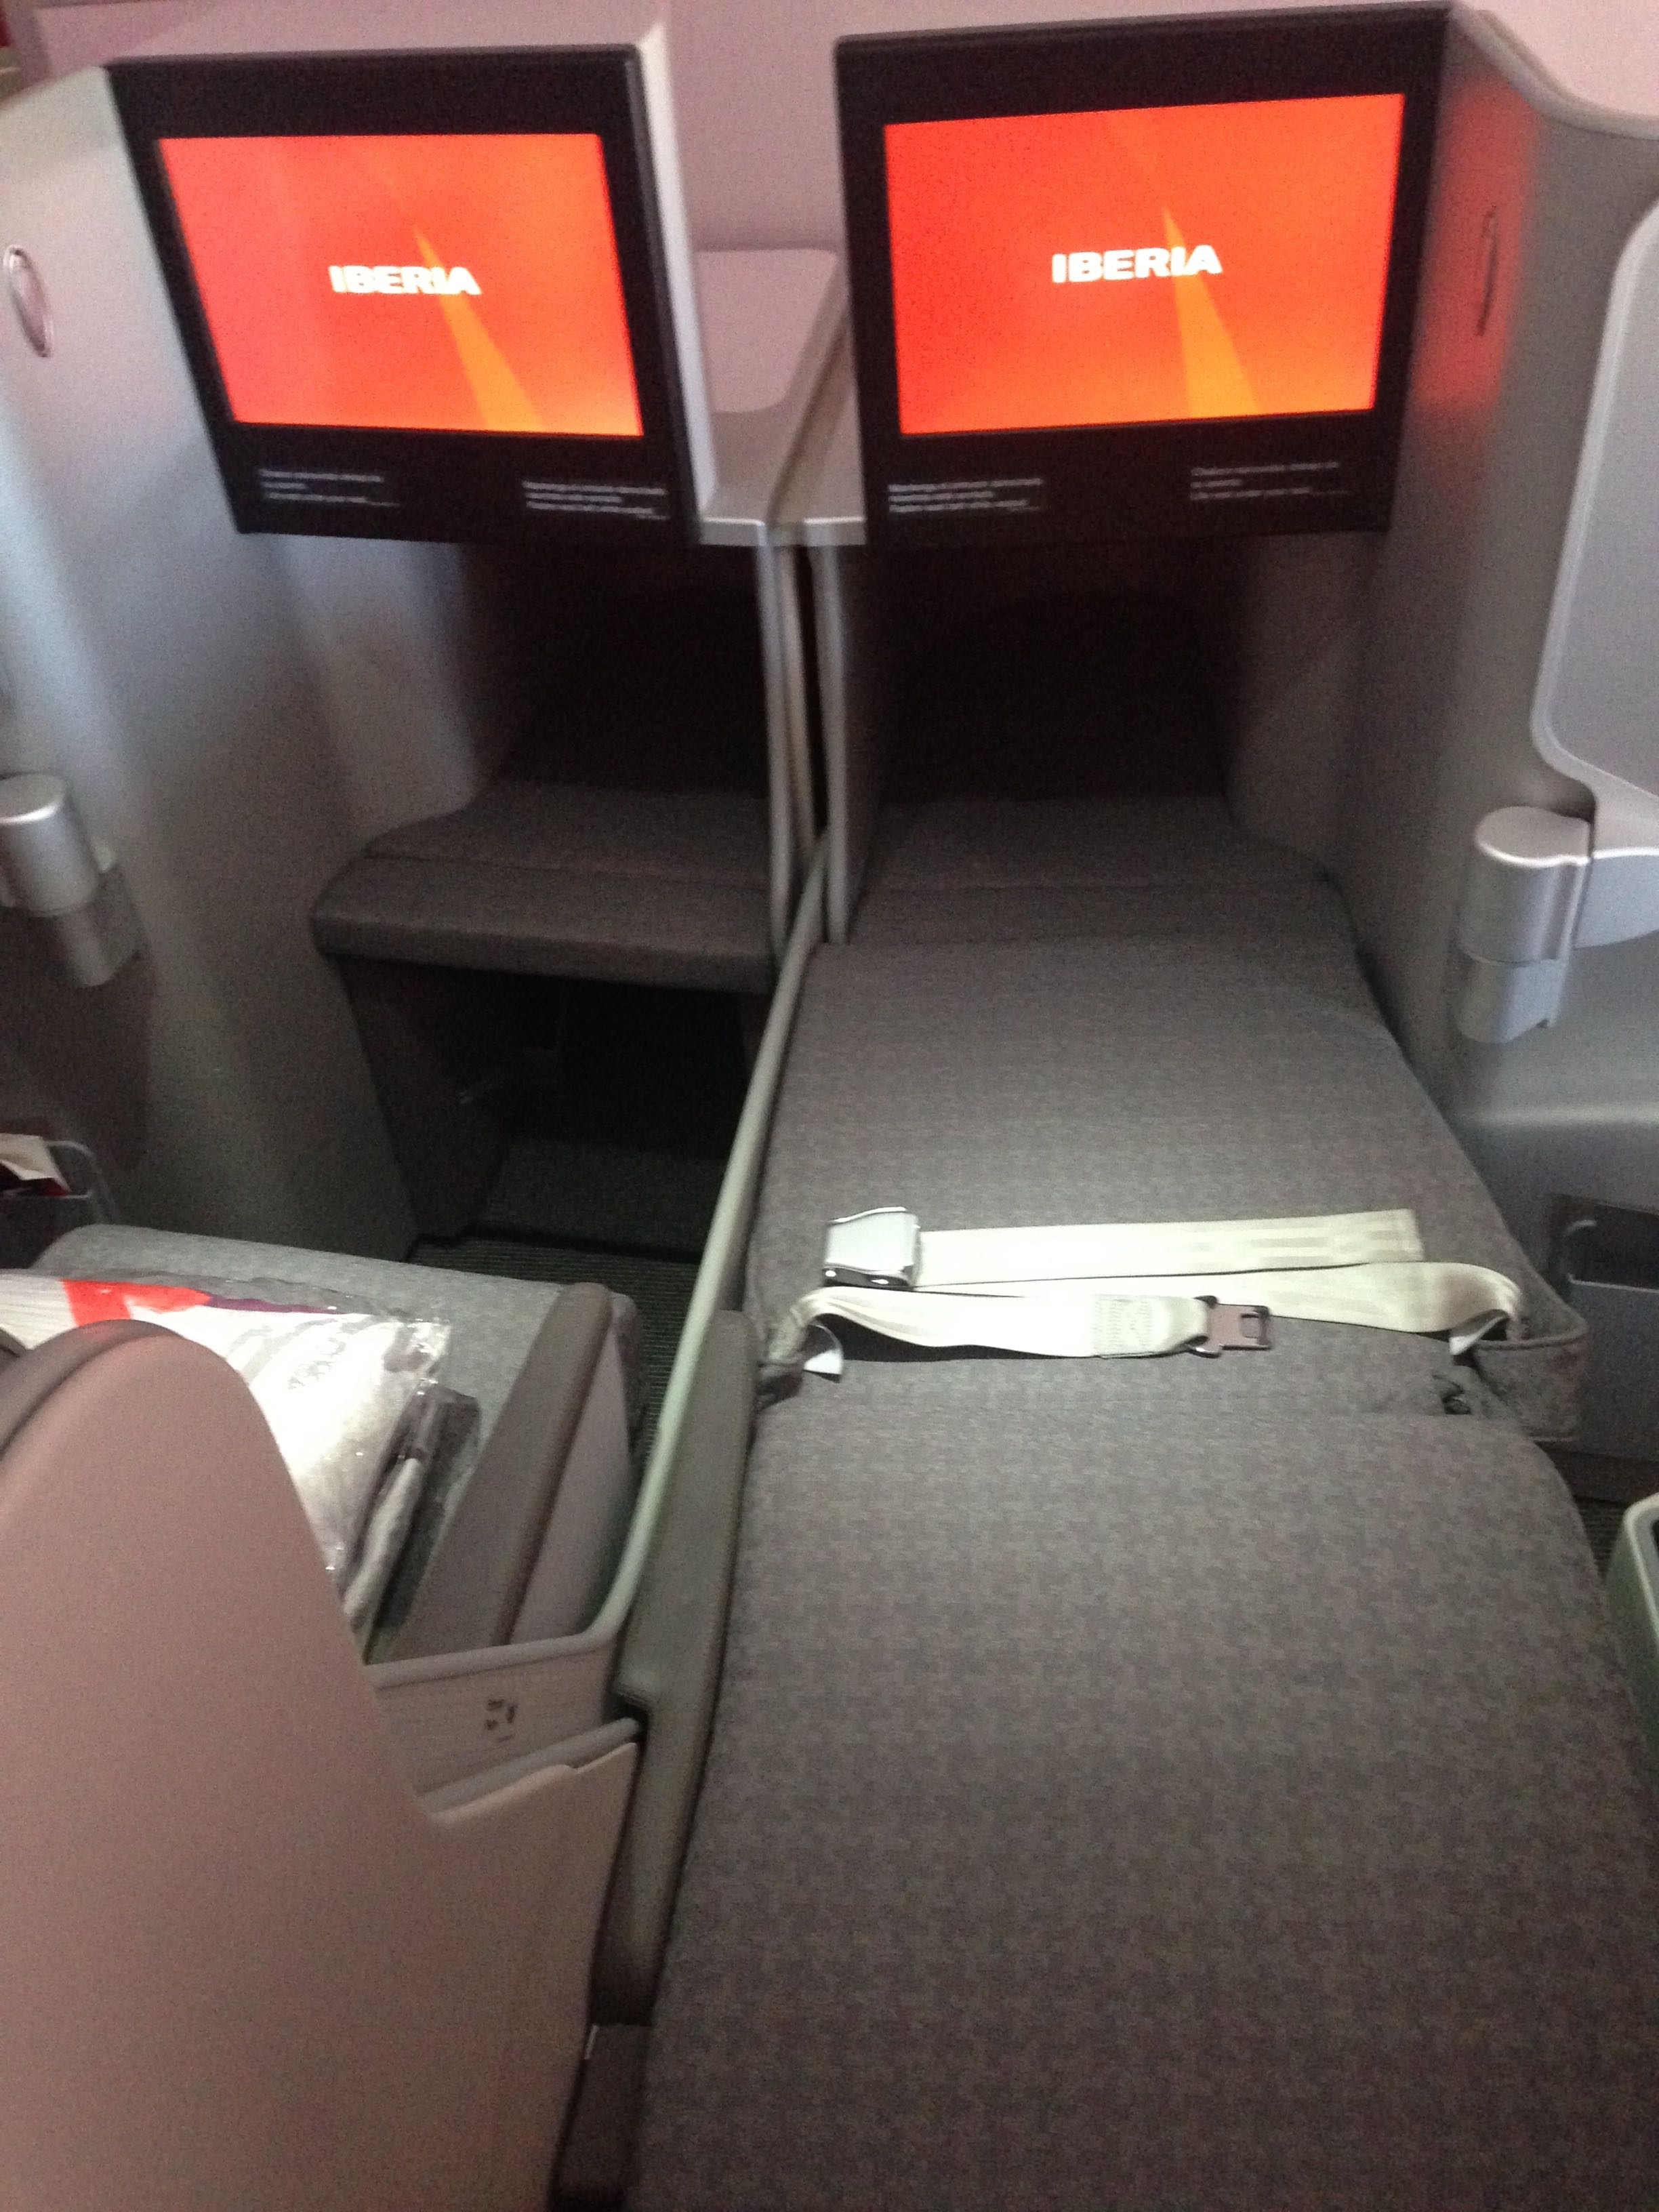 Booking Iberia business class using American Express rewards points